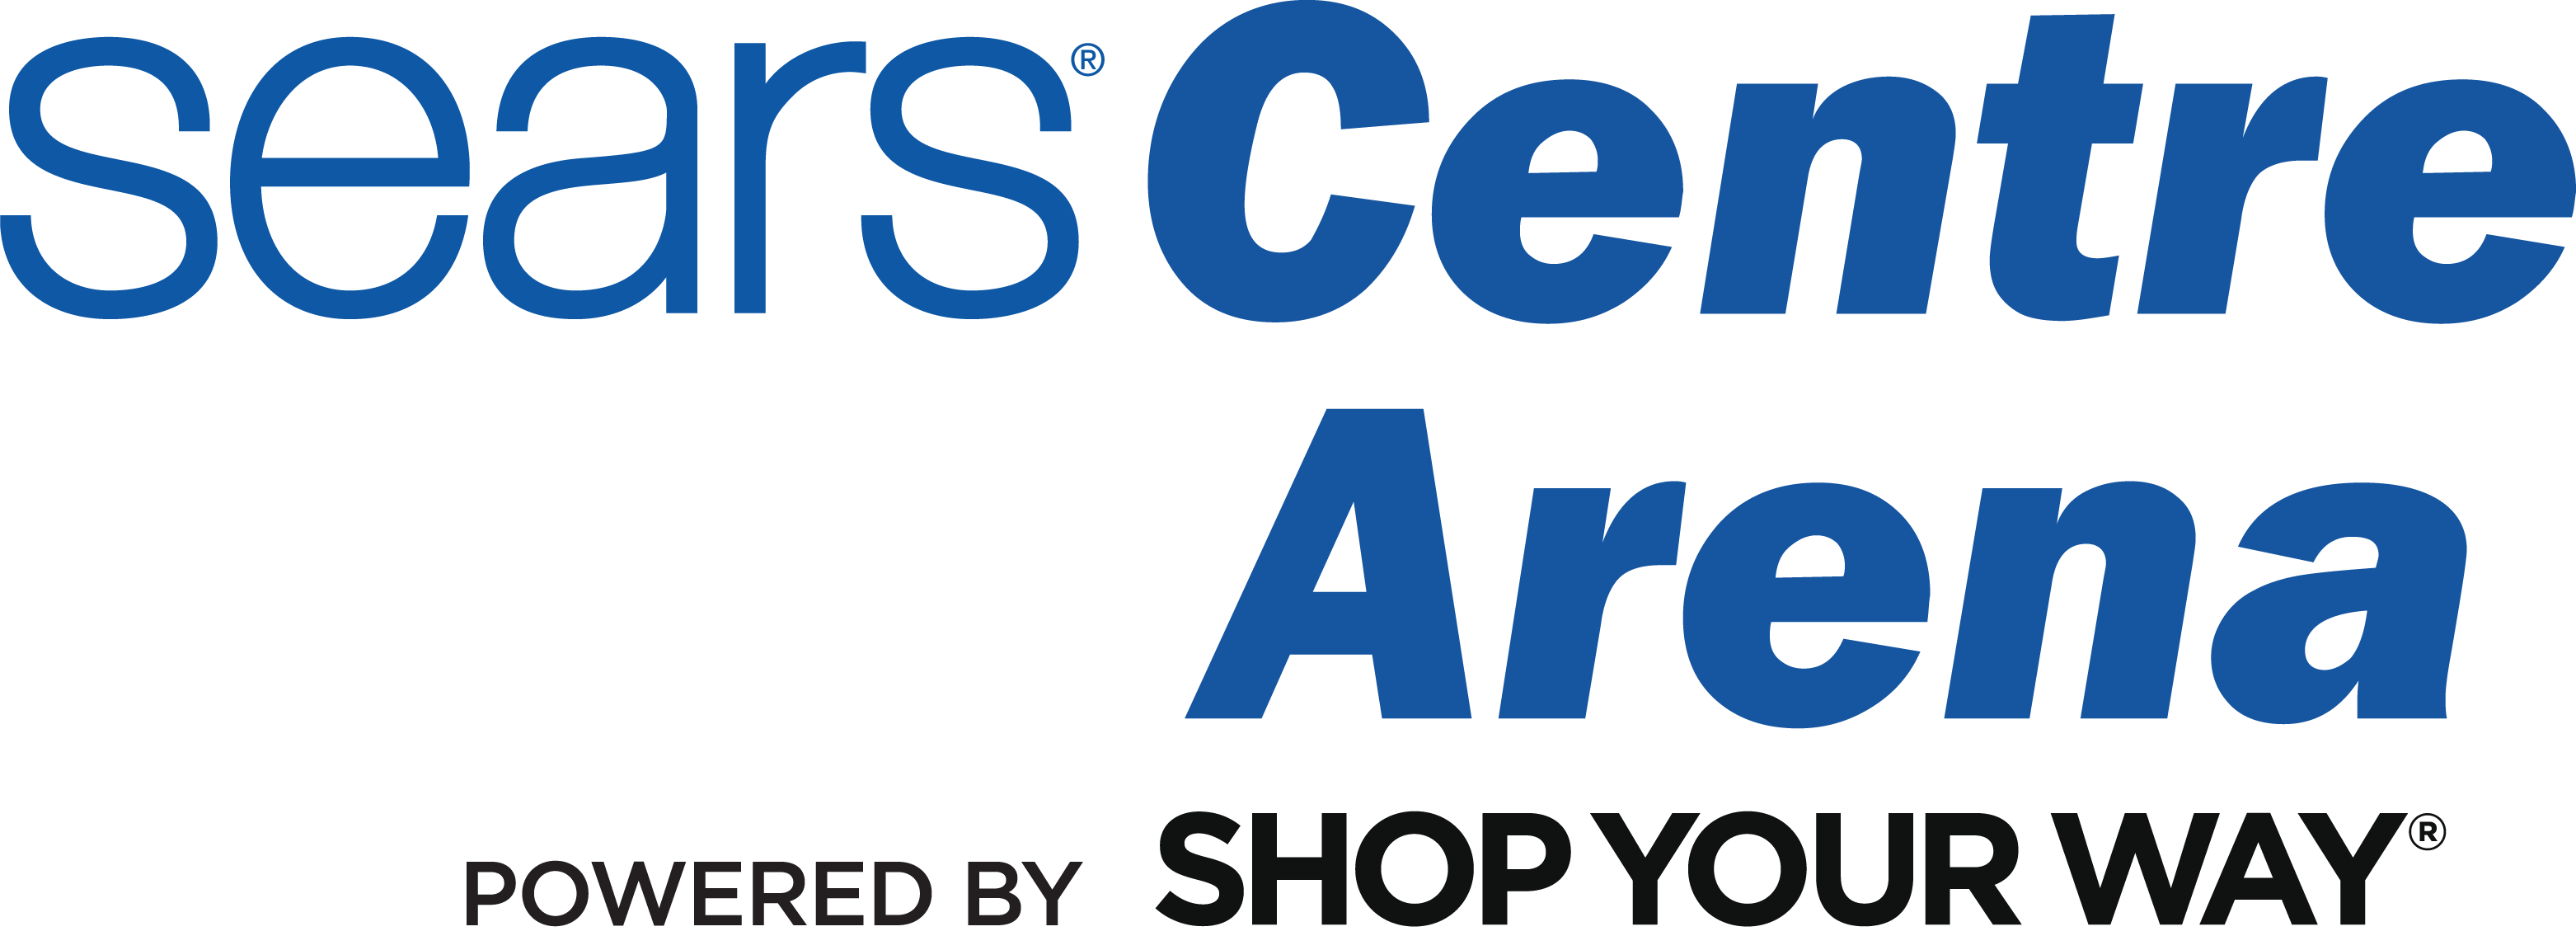 Arena Logo - Concert, Events & more in Northwestern Chicago | Sears Centre